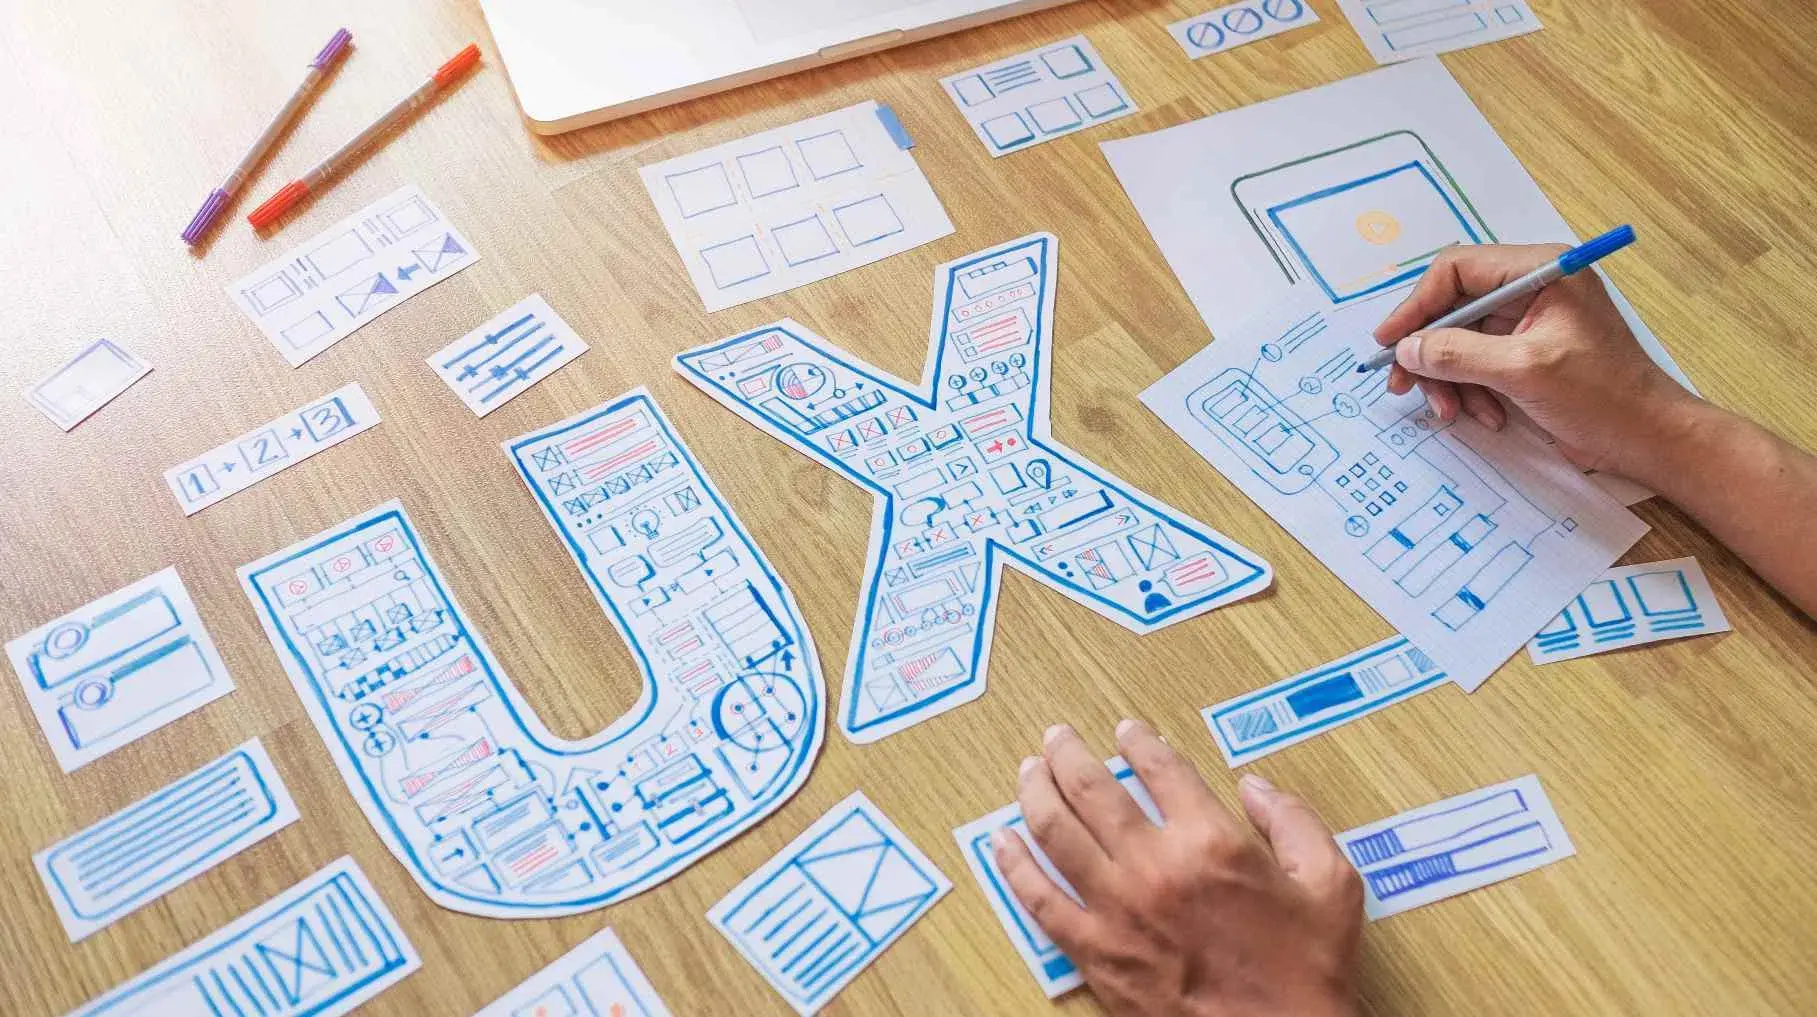 Empathy in UX Design: How to Create a Website that Meets the Needs of Your Users